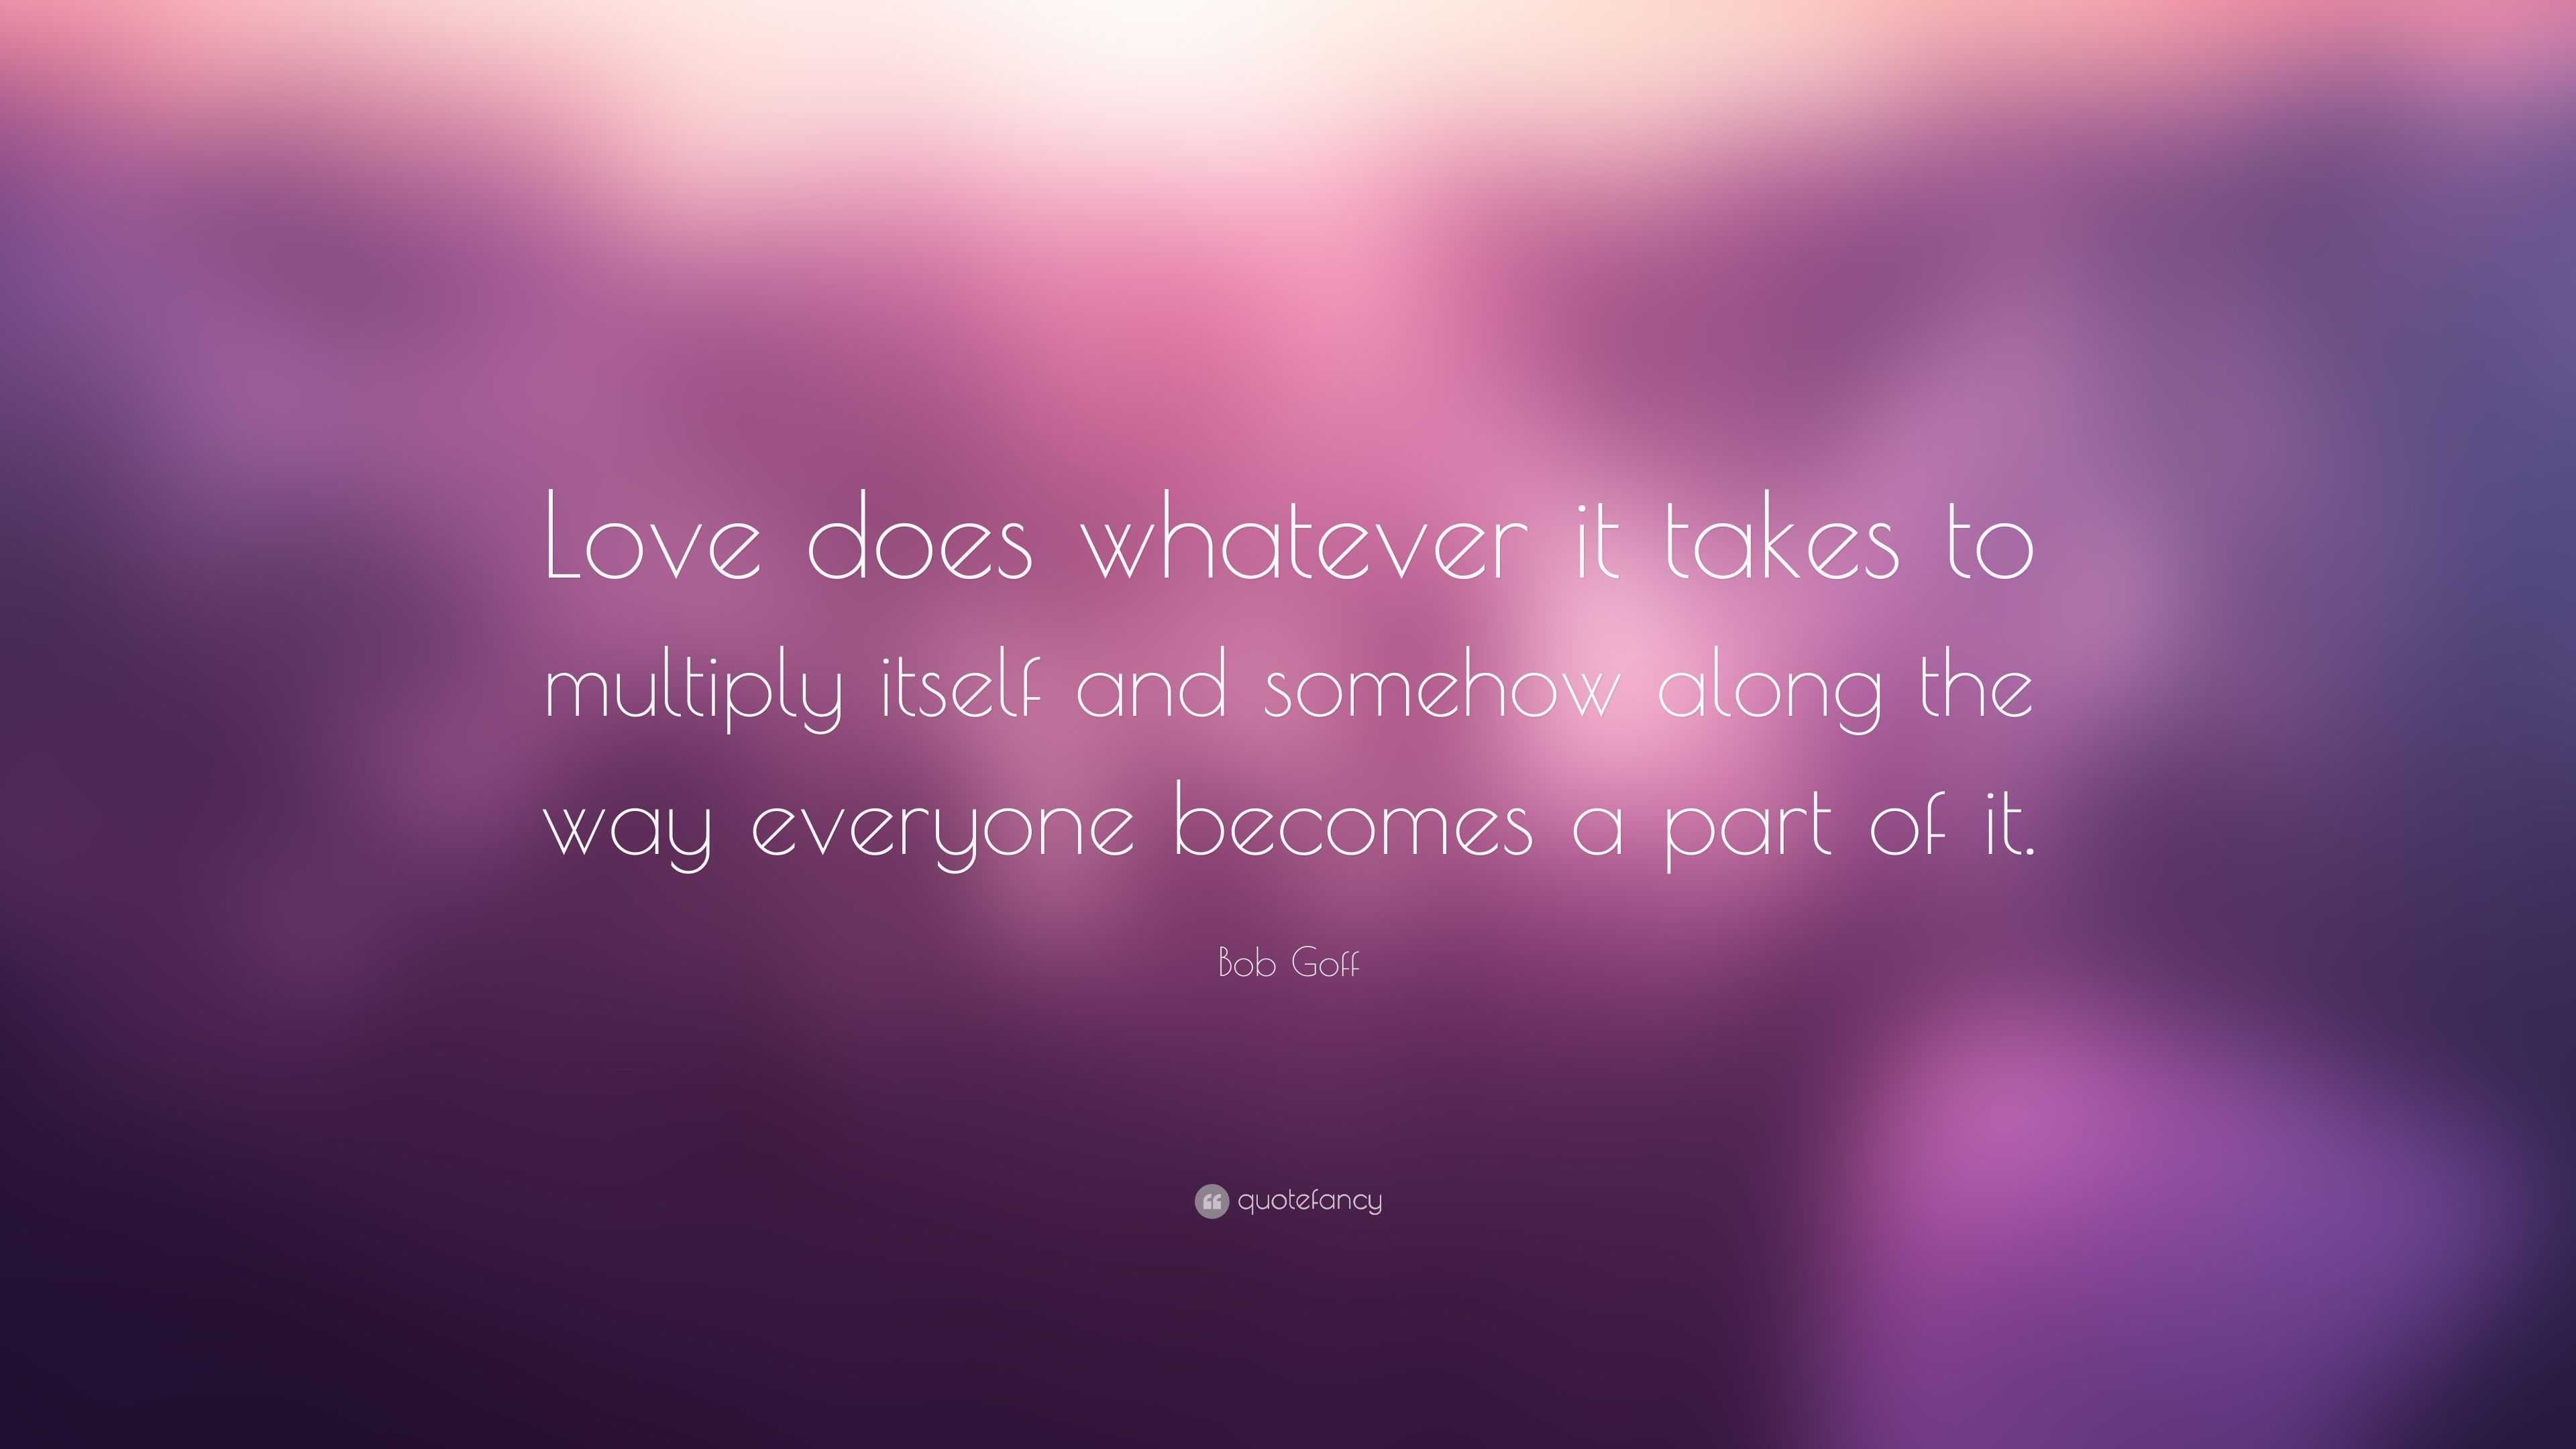 Bob Goff Quote: “Love does whatever it takes to multiply itself and ...